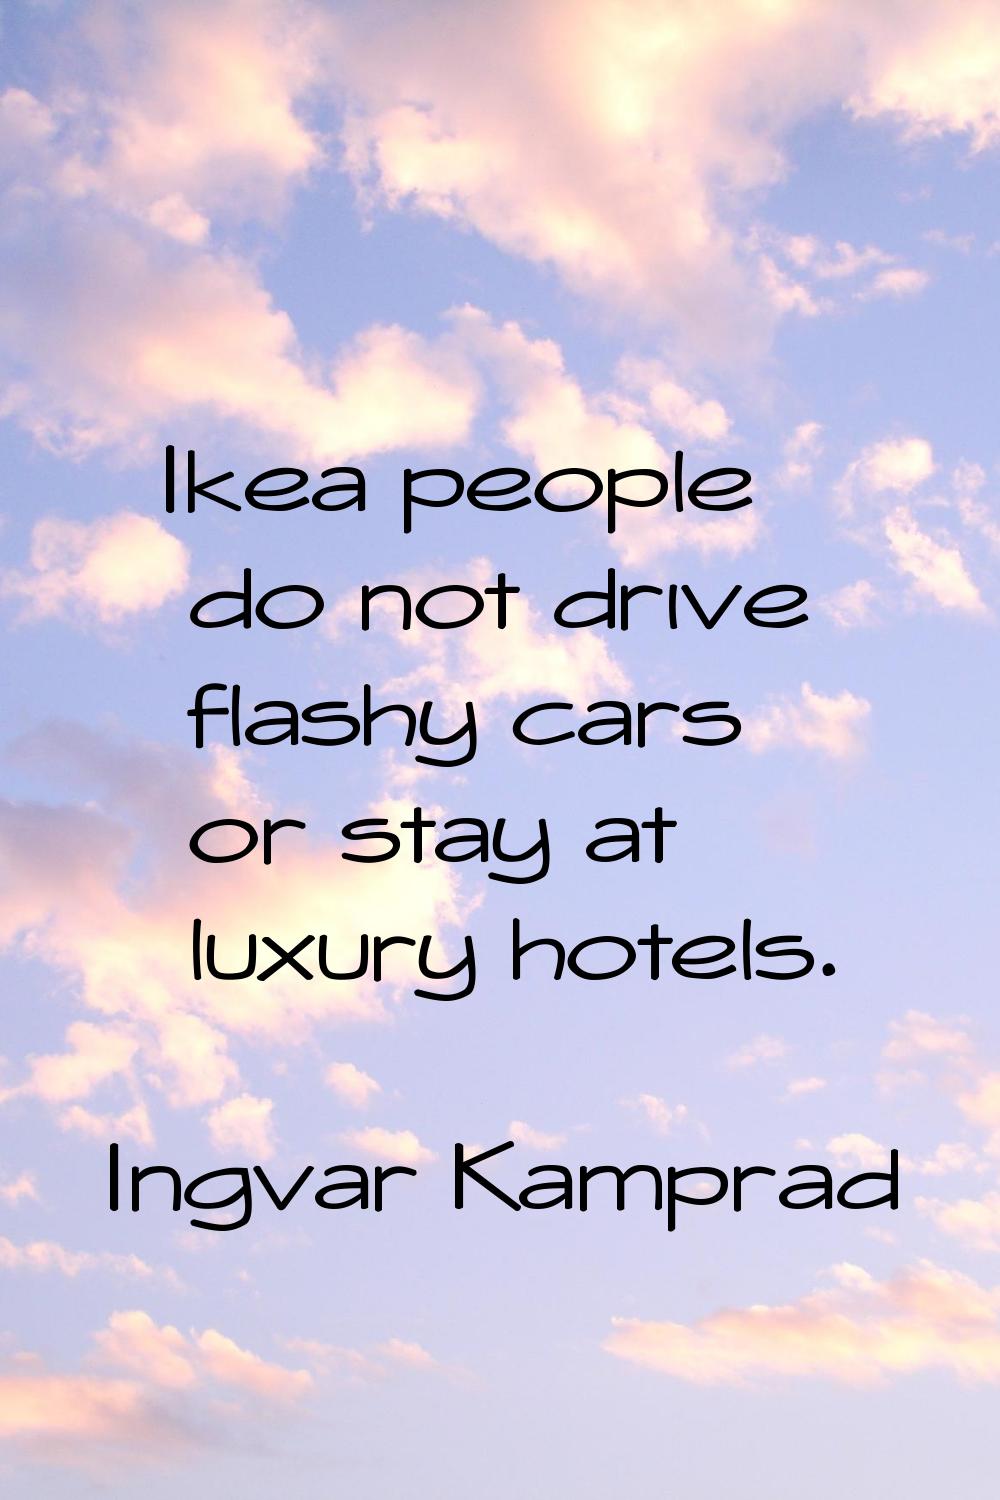 Ikea people do not drive flashy cars or stay at luxury hotels.